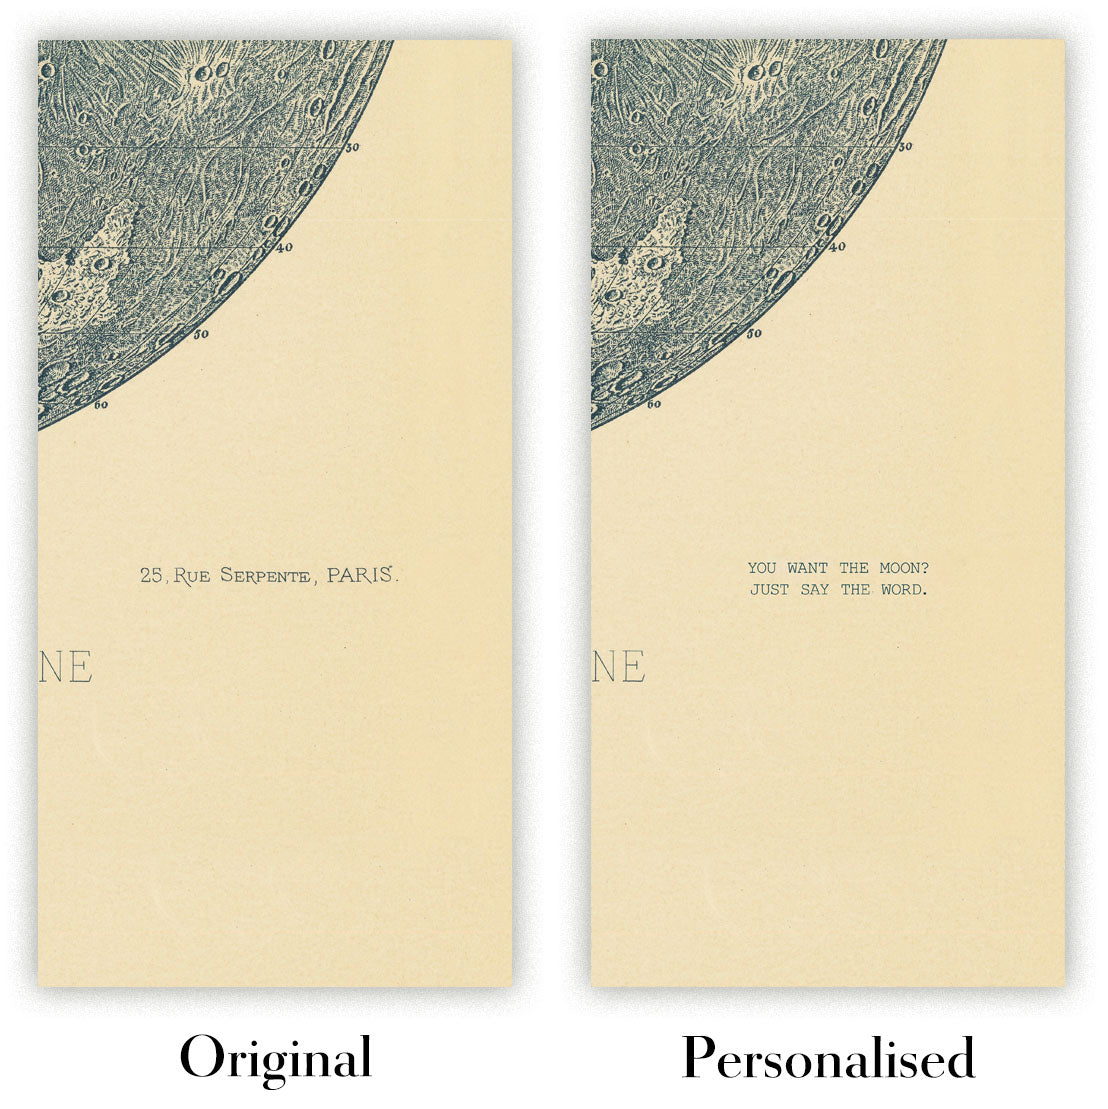 Image showing the difference between an Original map and a Personalised map